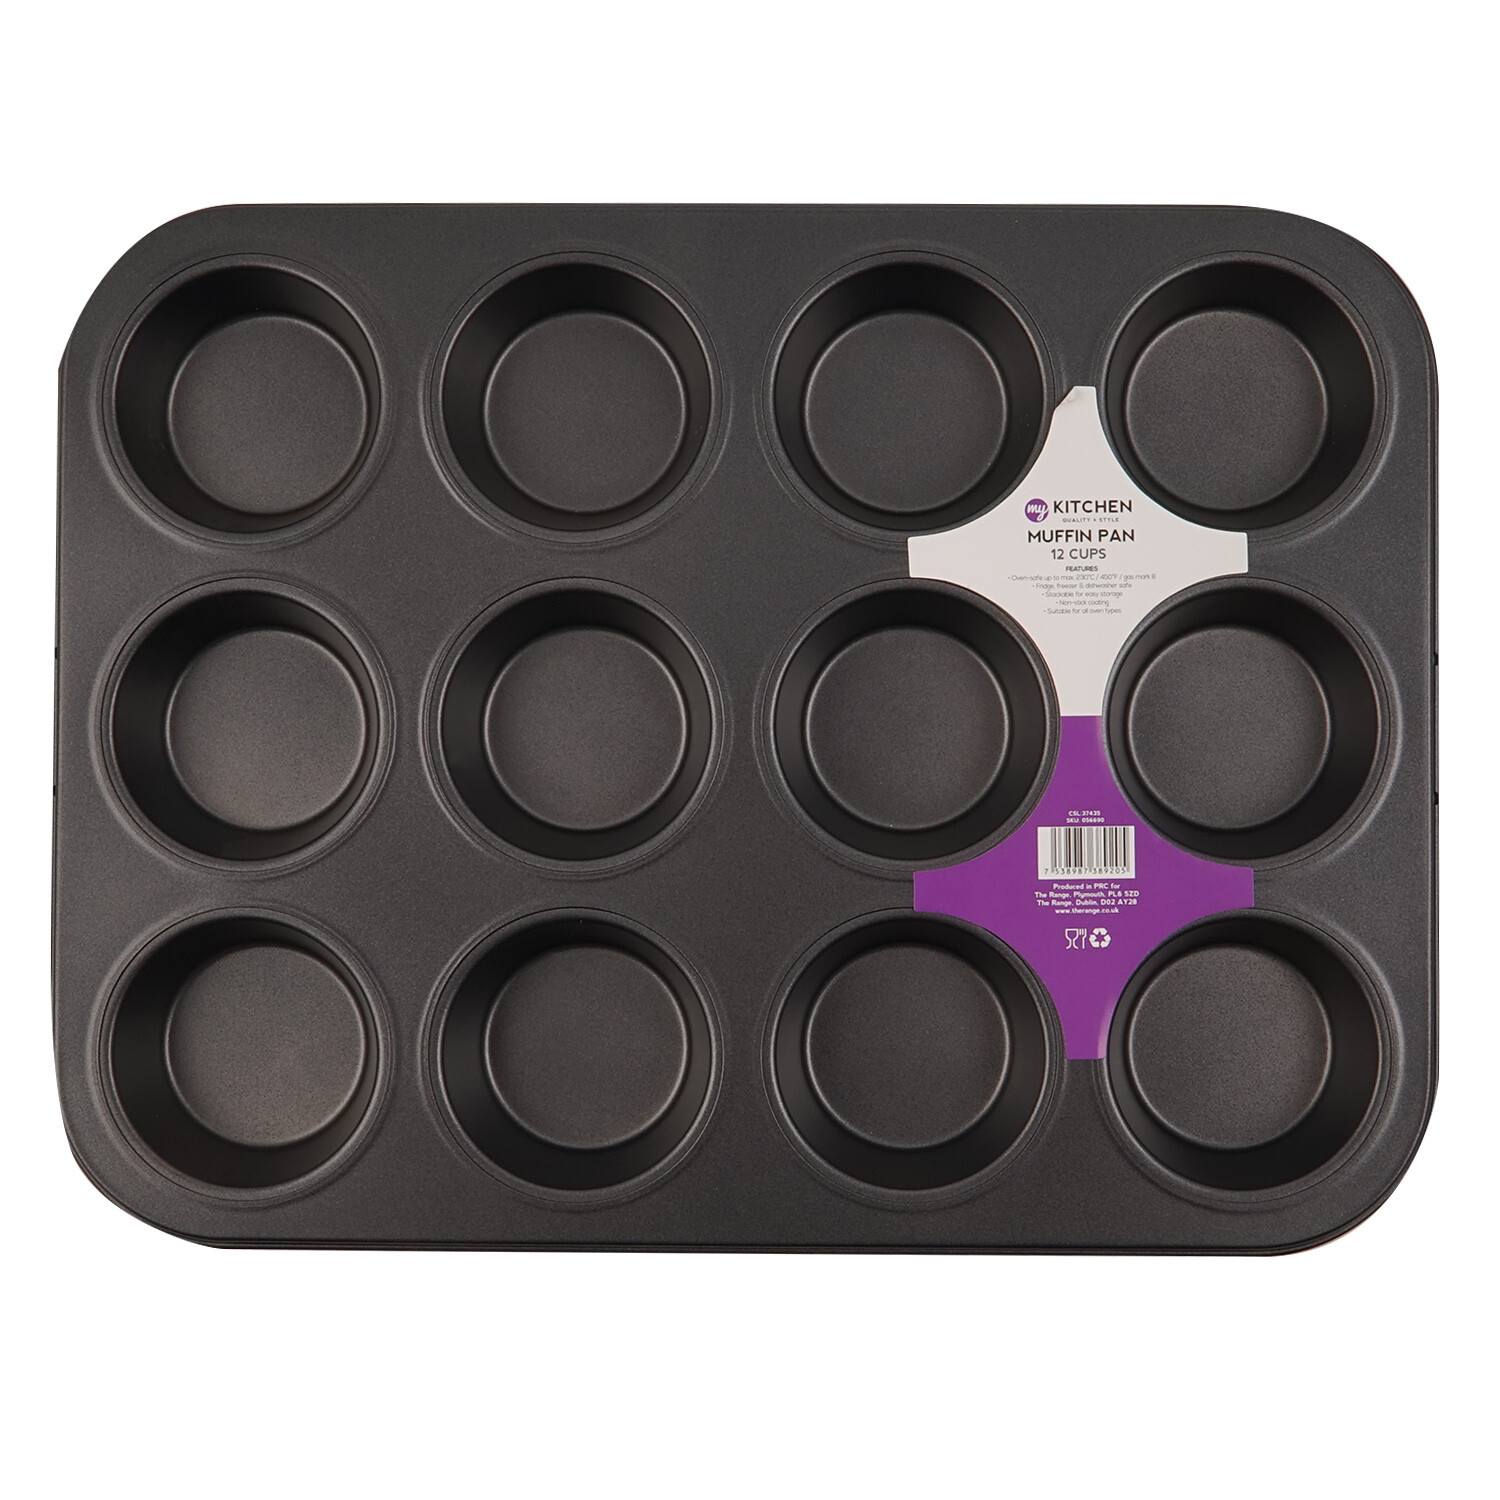 My Home 12 Cup Black Muffin Pan Image